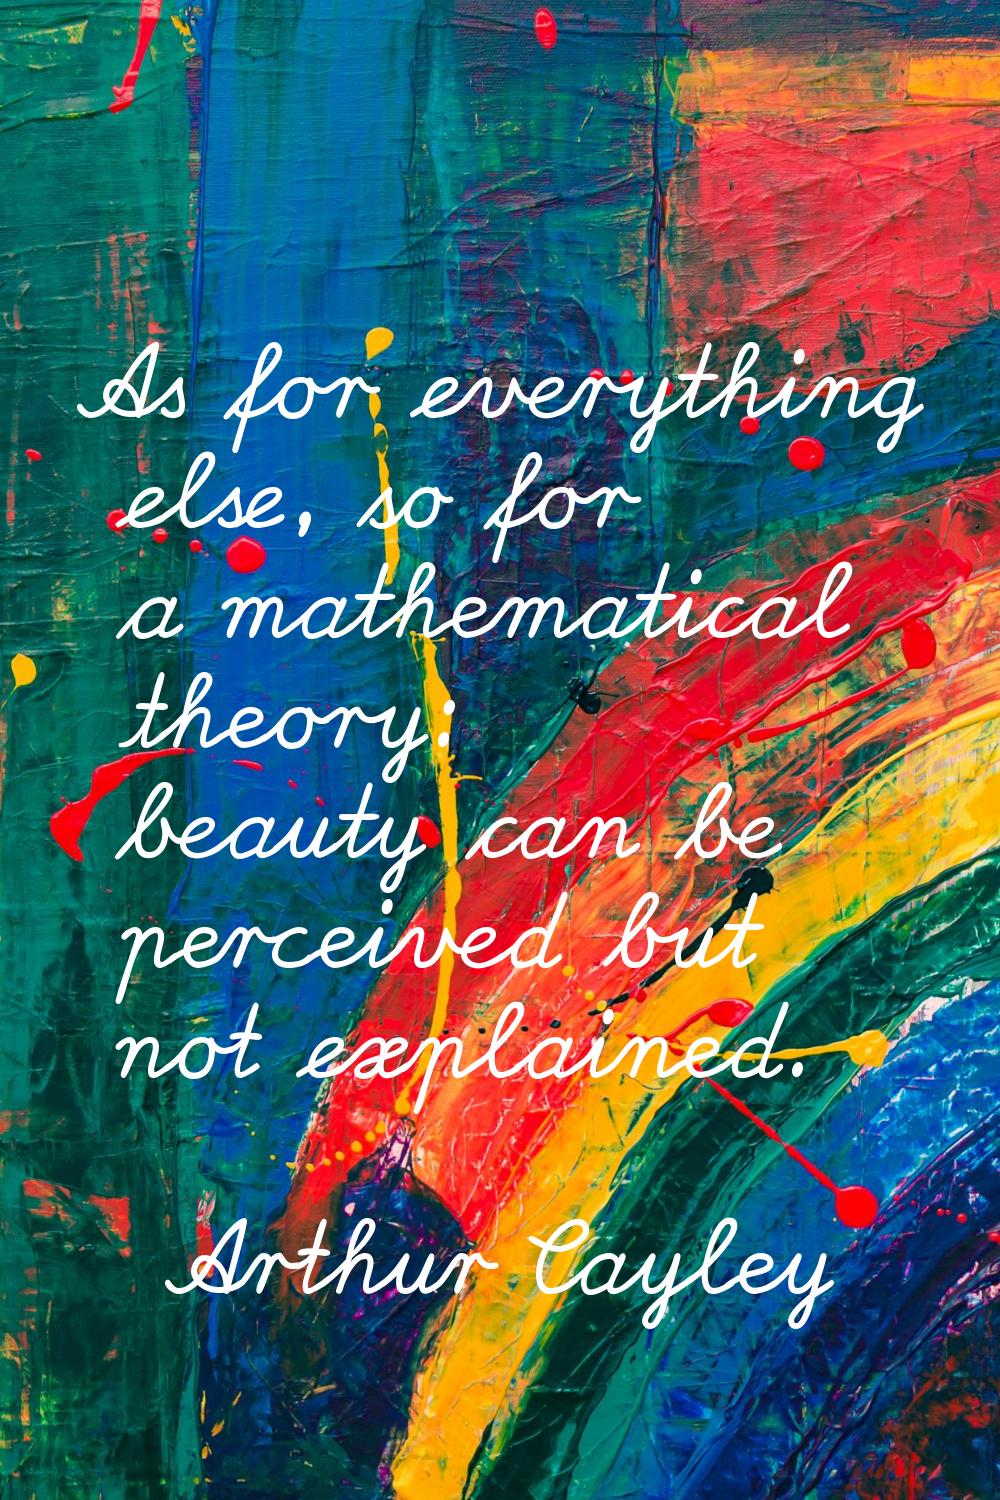 As for everything else, so for a mathematical theory: beauty can be perceived but not explained.